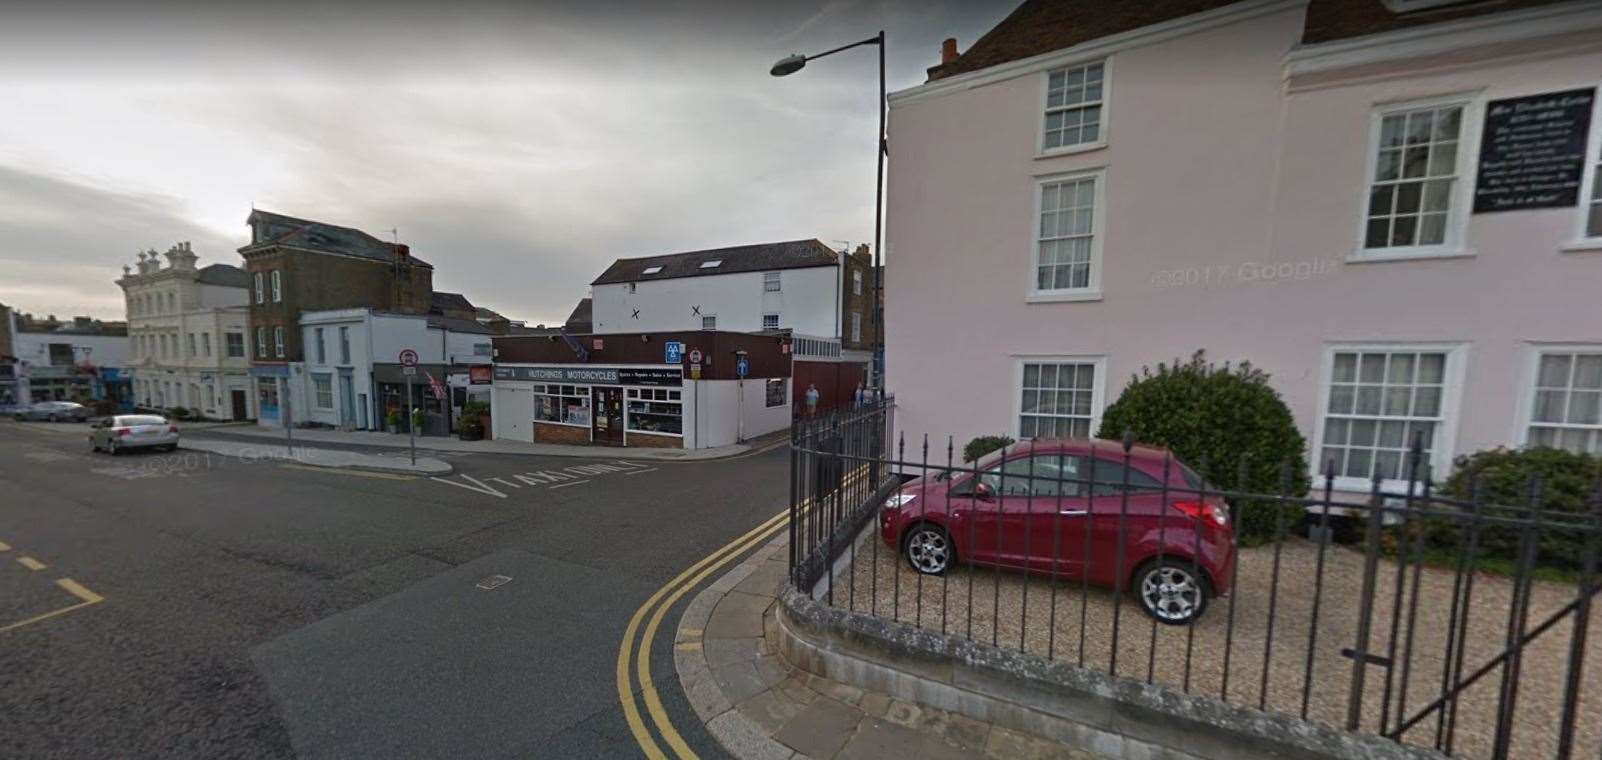 The incident happened close to the junction of South Street and Middle Street in Deal. Picture: Google